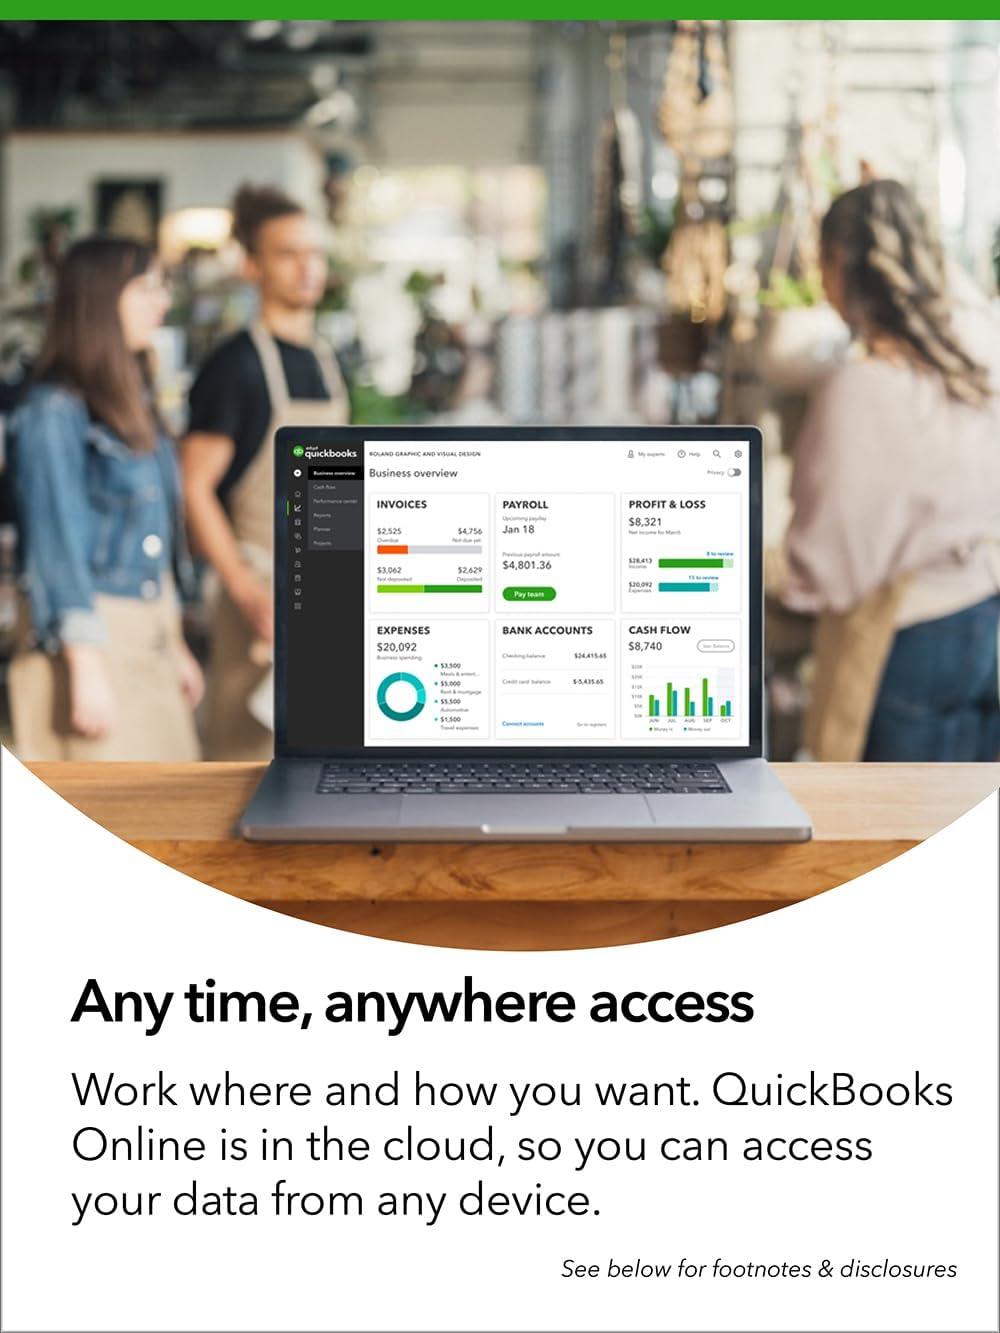 Quickbooks Online Simple Start - Instant Download for Windows and Mac (1 User) - SoftwareCW - Authorized Reseller